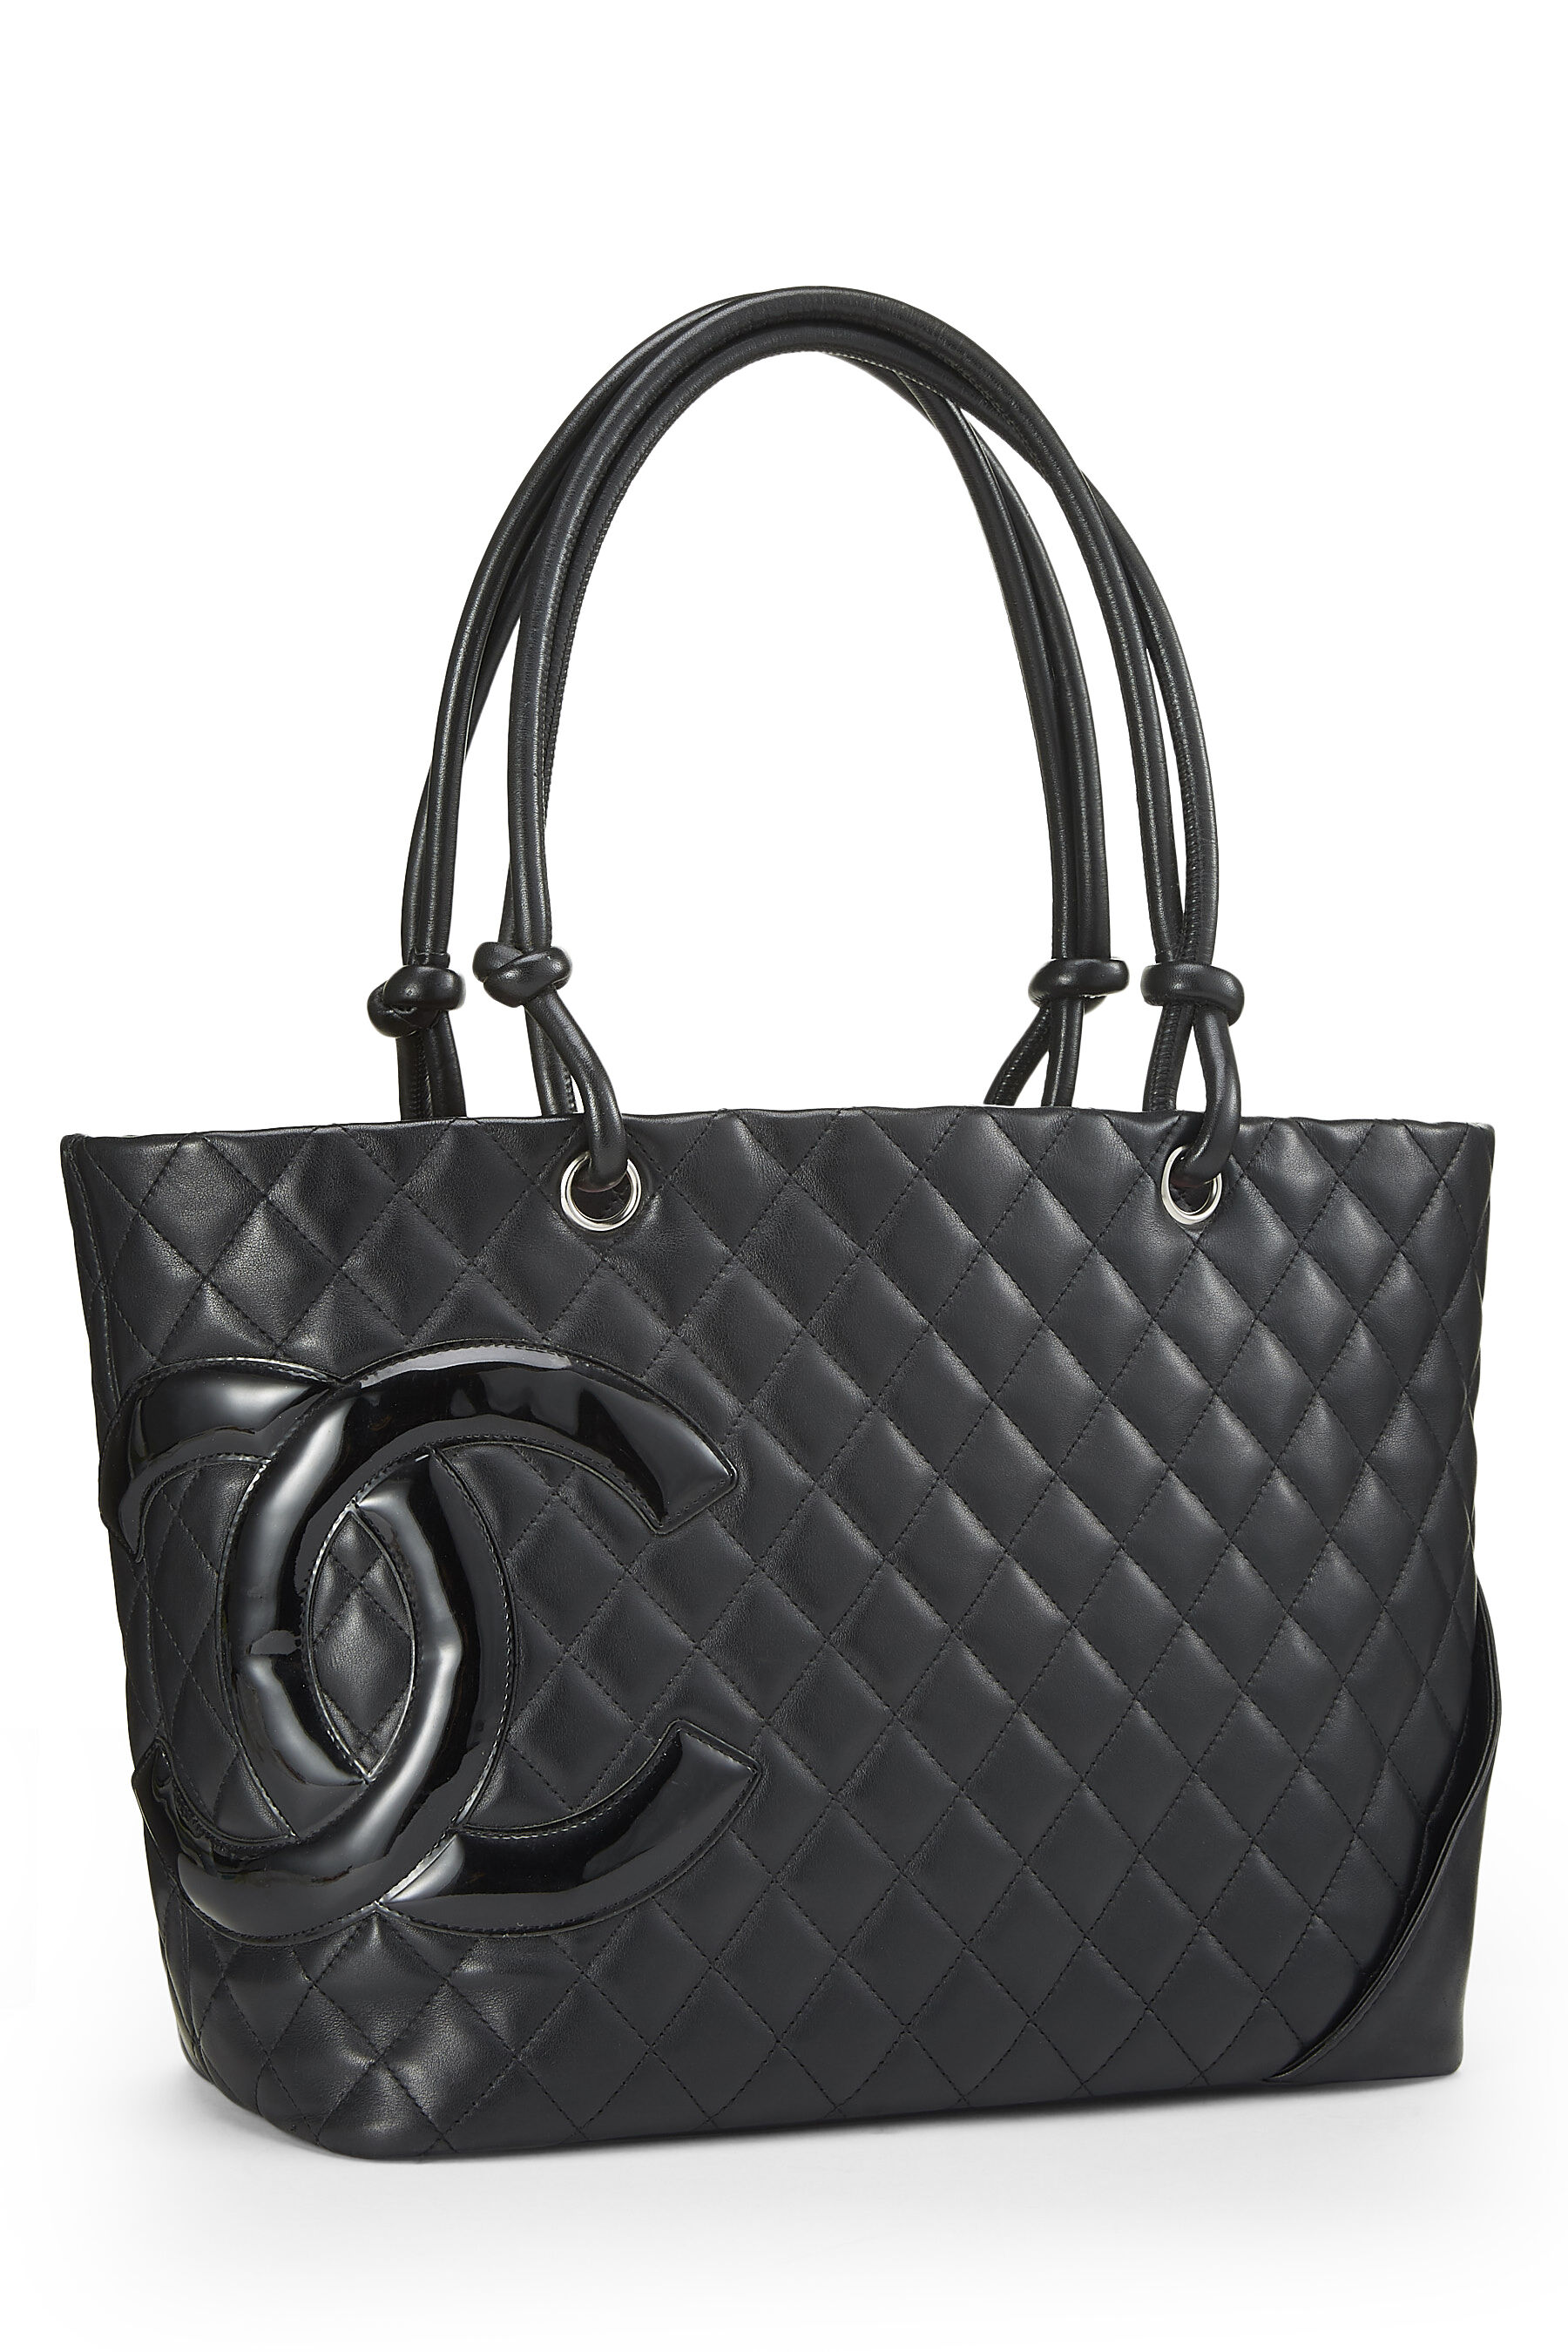 Chanel Black Quilted Calfskin Cambon Tote Large